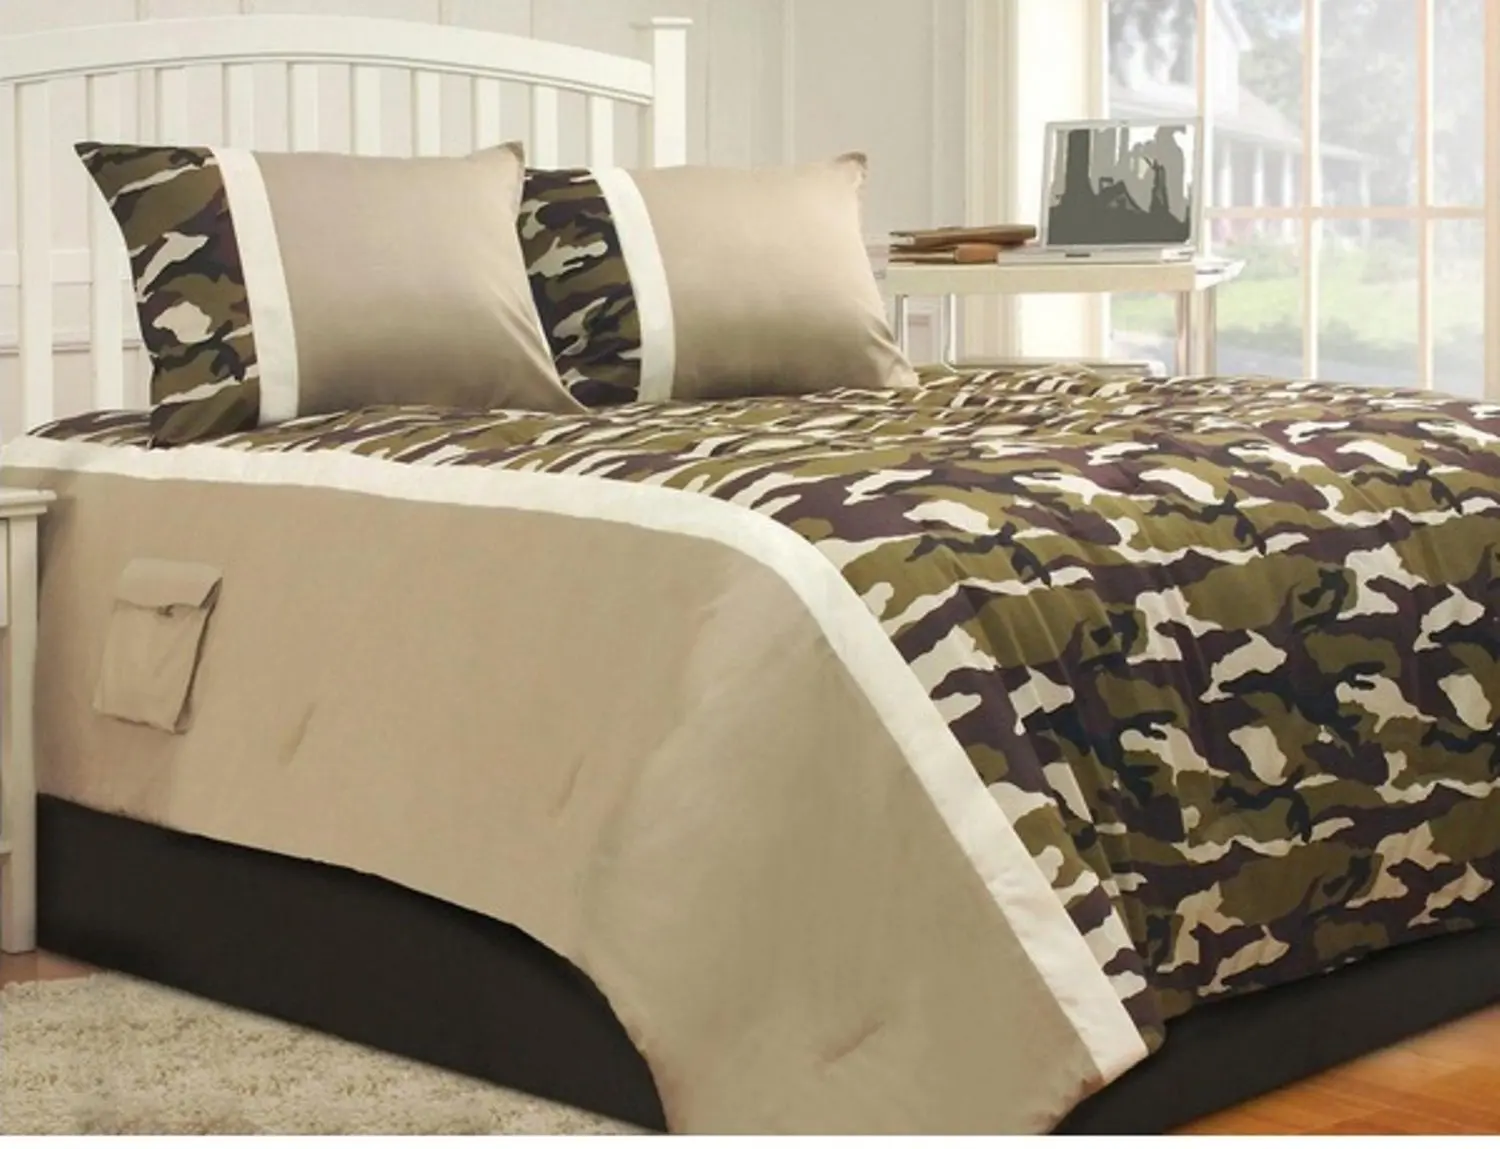 Cheap Army Bedroom Decor Find Army Bedroom Decor Deals On